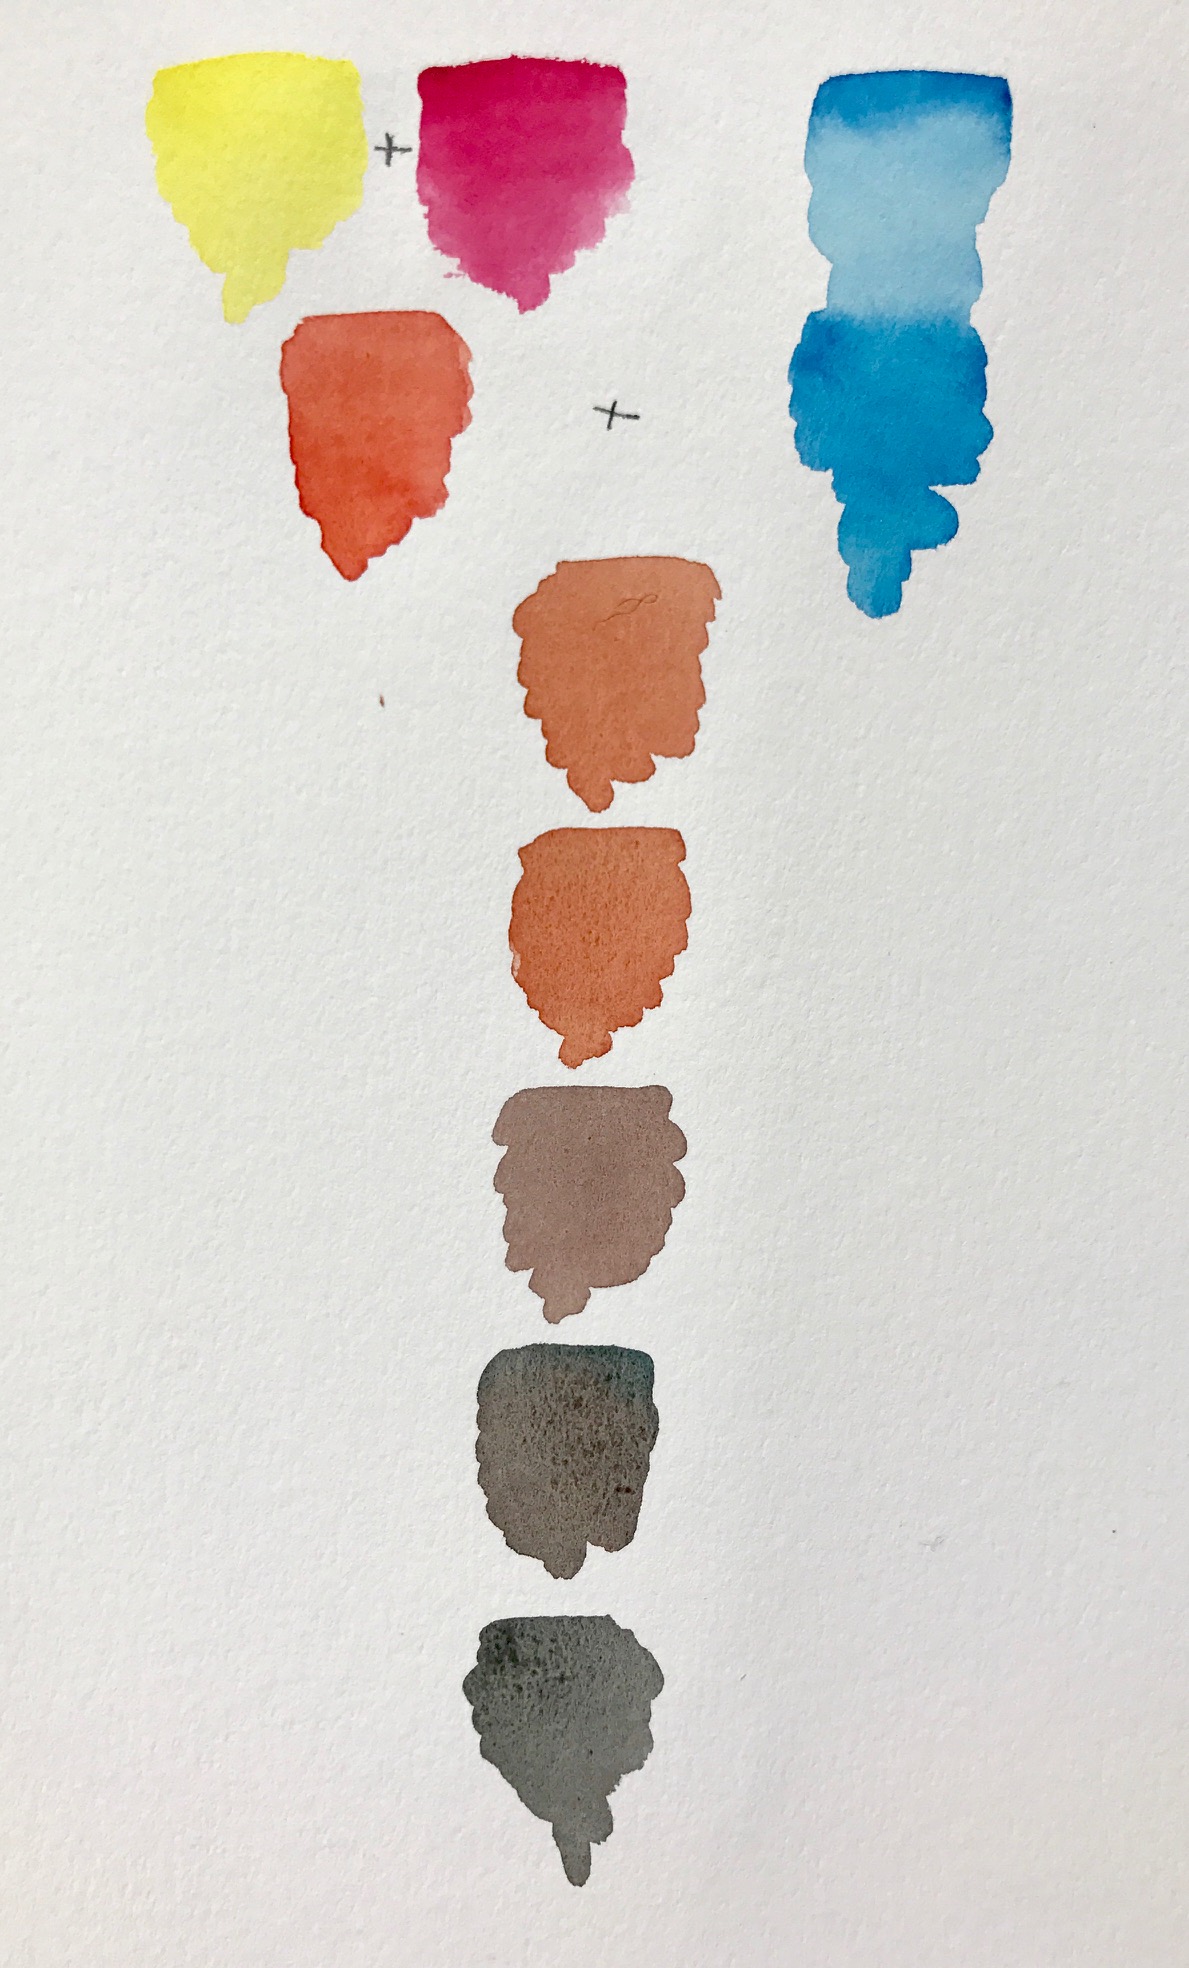 Mixing Neutrals with Orange and blue